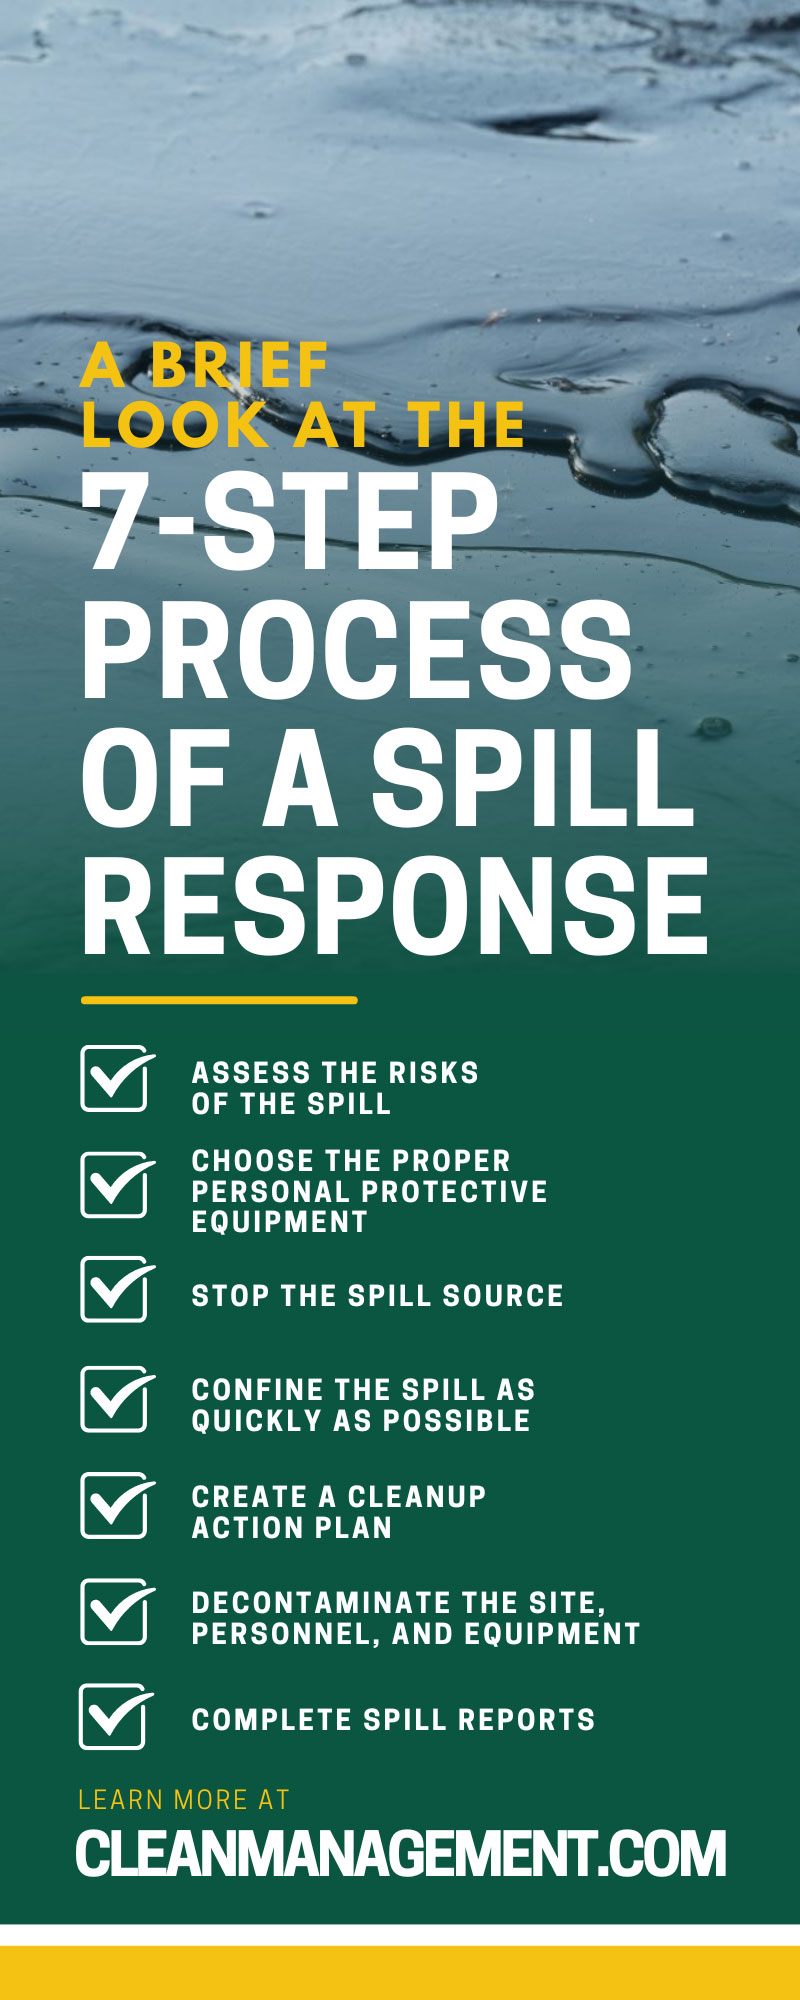 A Brief Look at the 7-Step Process of a Spill Response